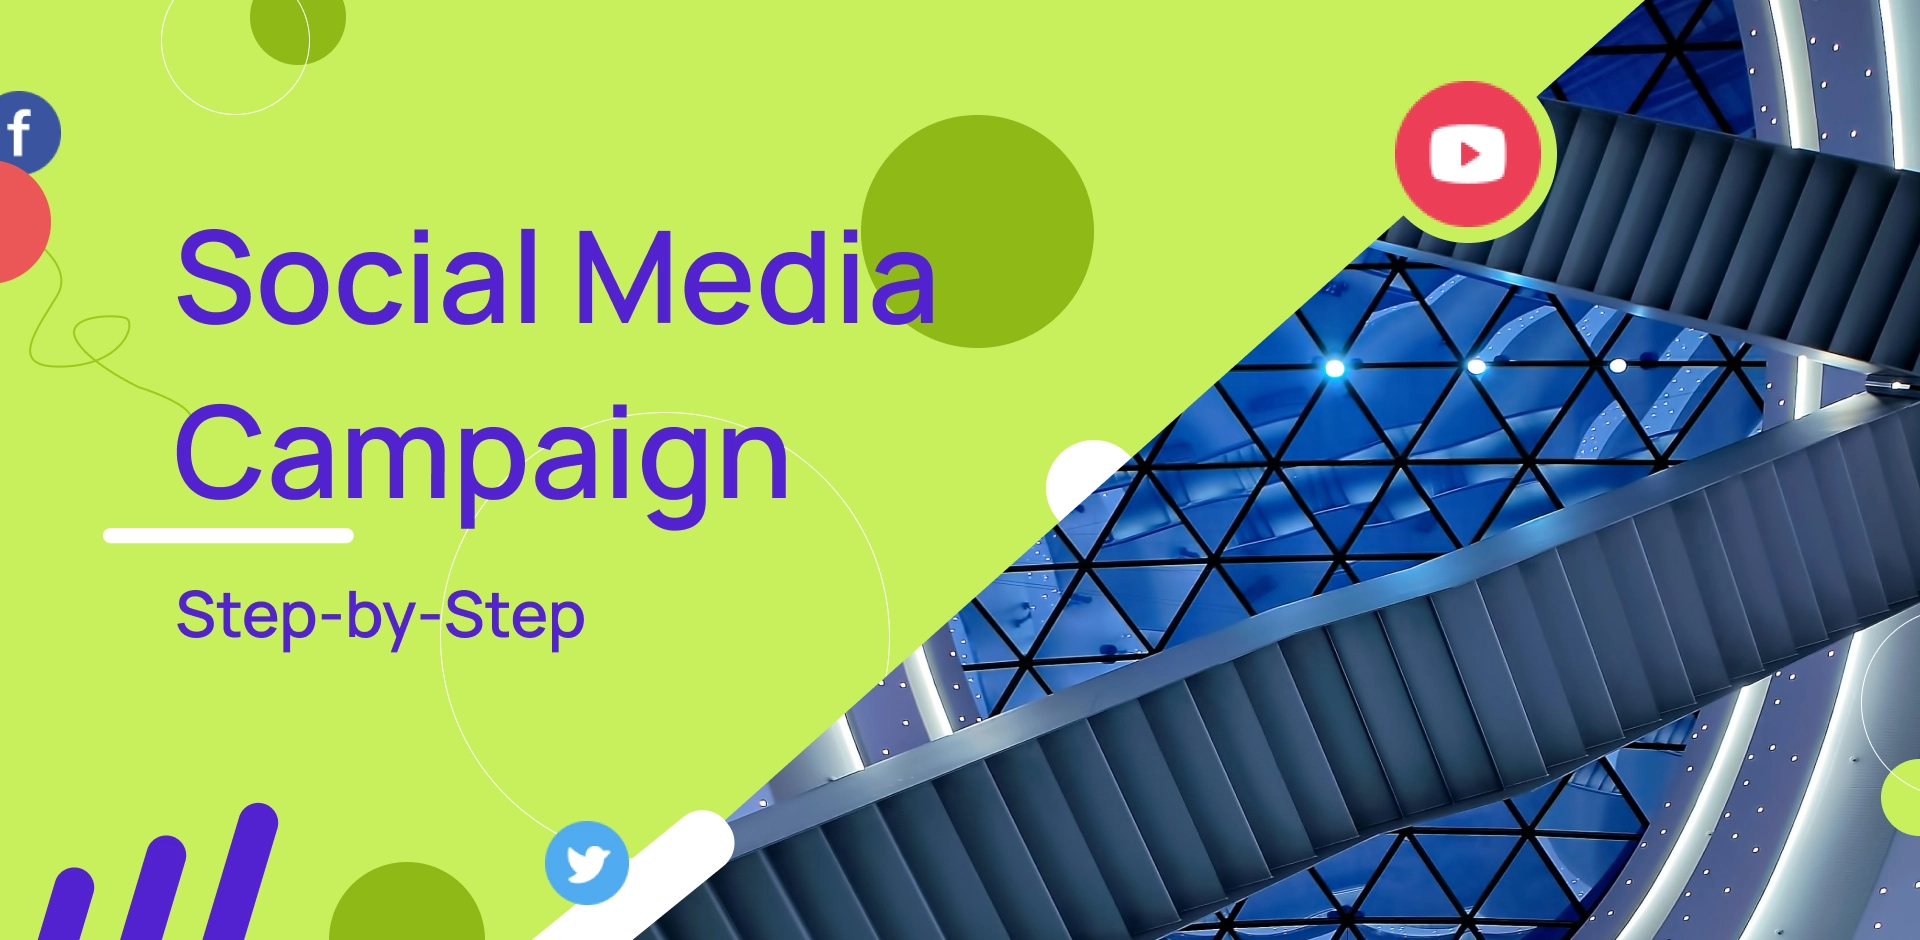 Graphic with a photo of a stairs a green background with social media icons and the words "Social Media Campaign: Step-by-Step"